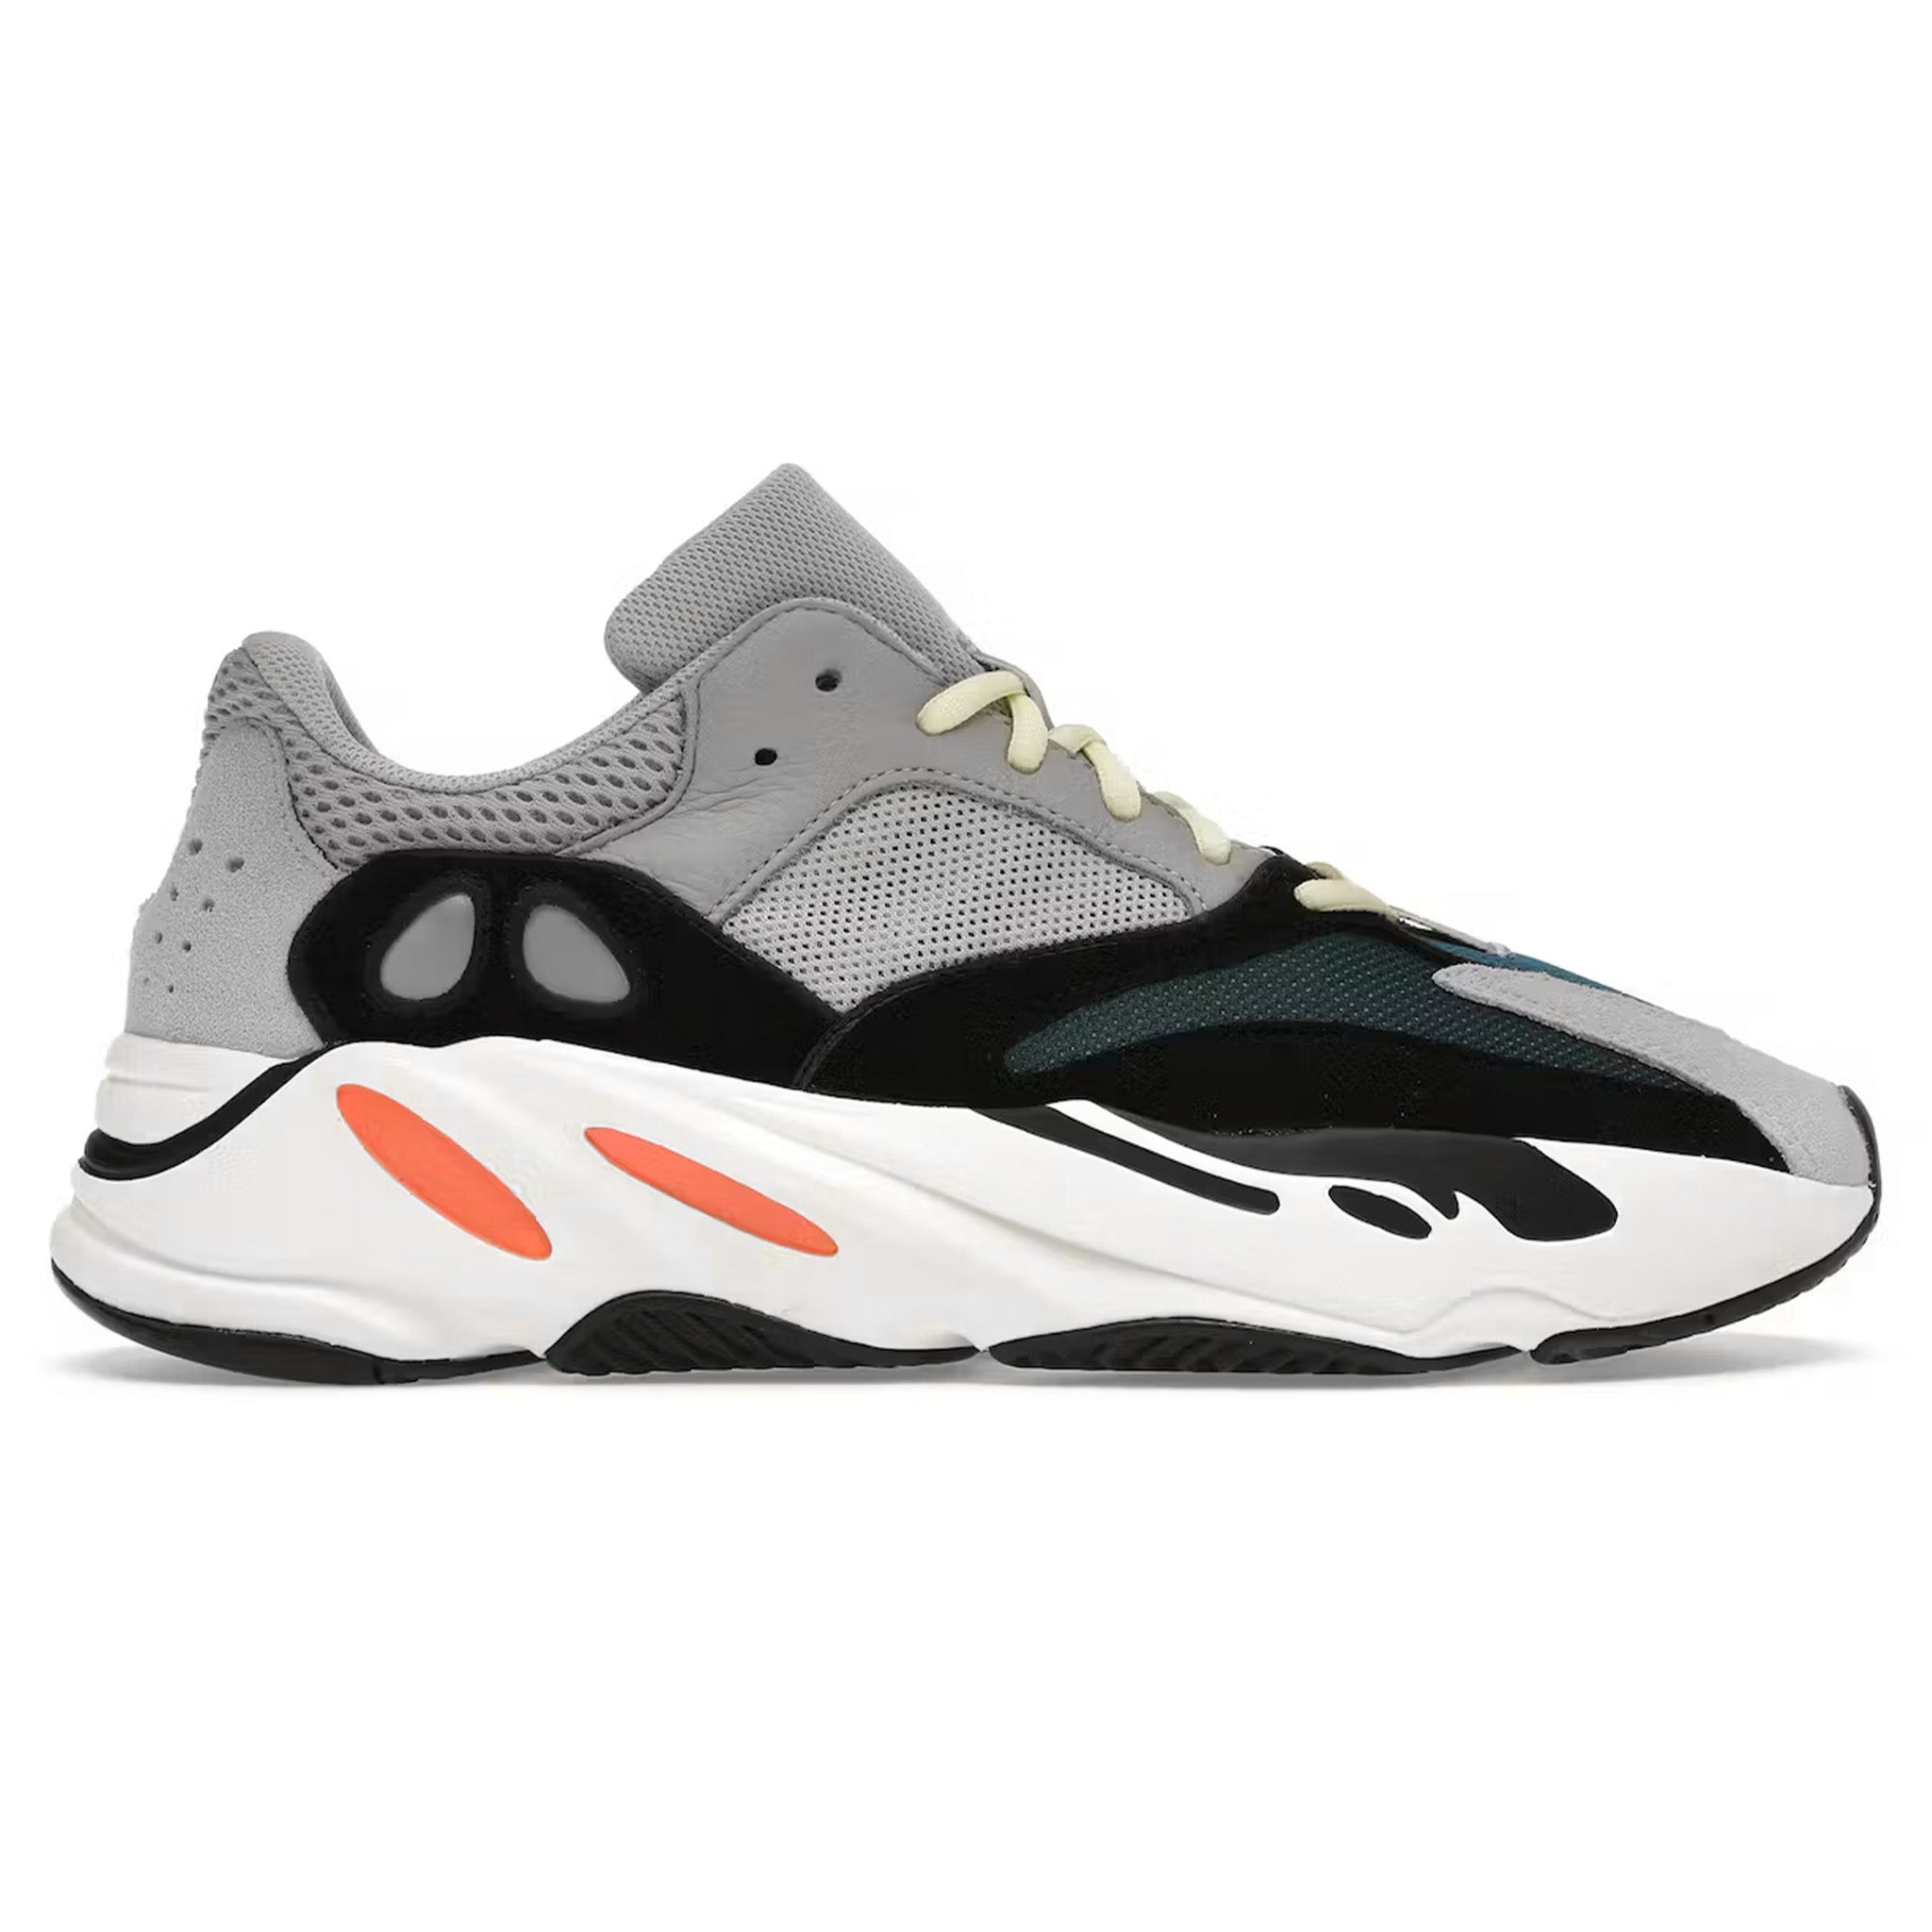 Image of Adidas Yeezy 700 Boost Wave Runner